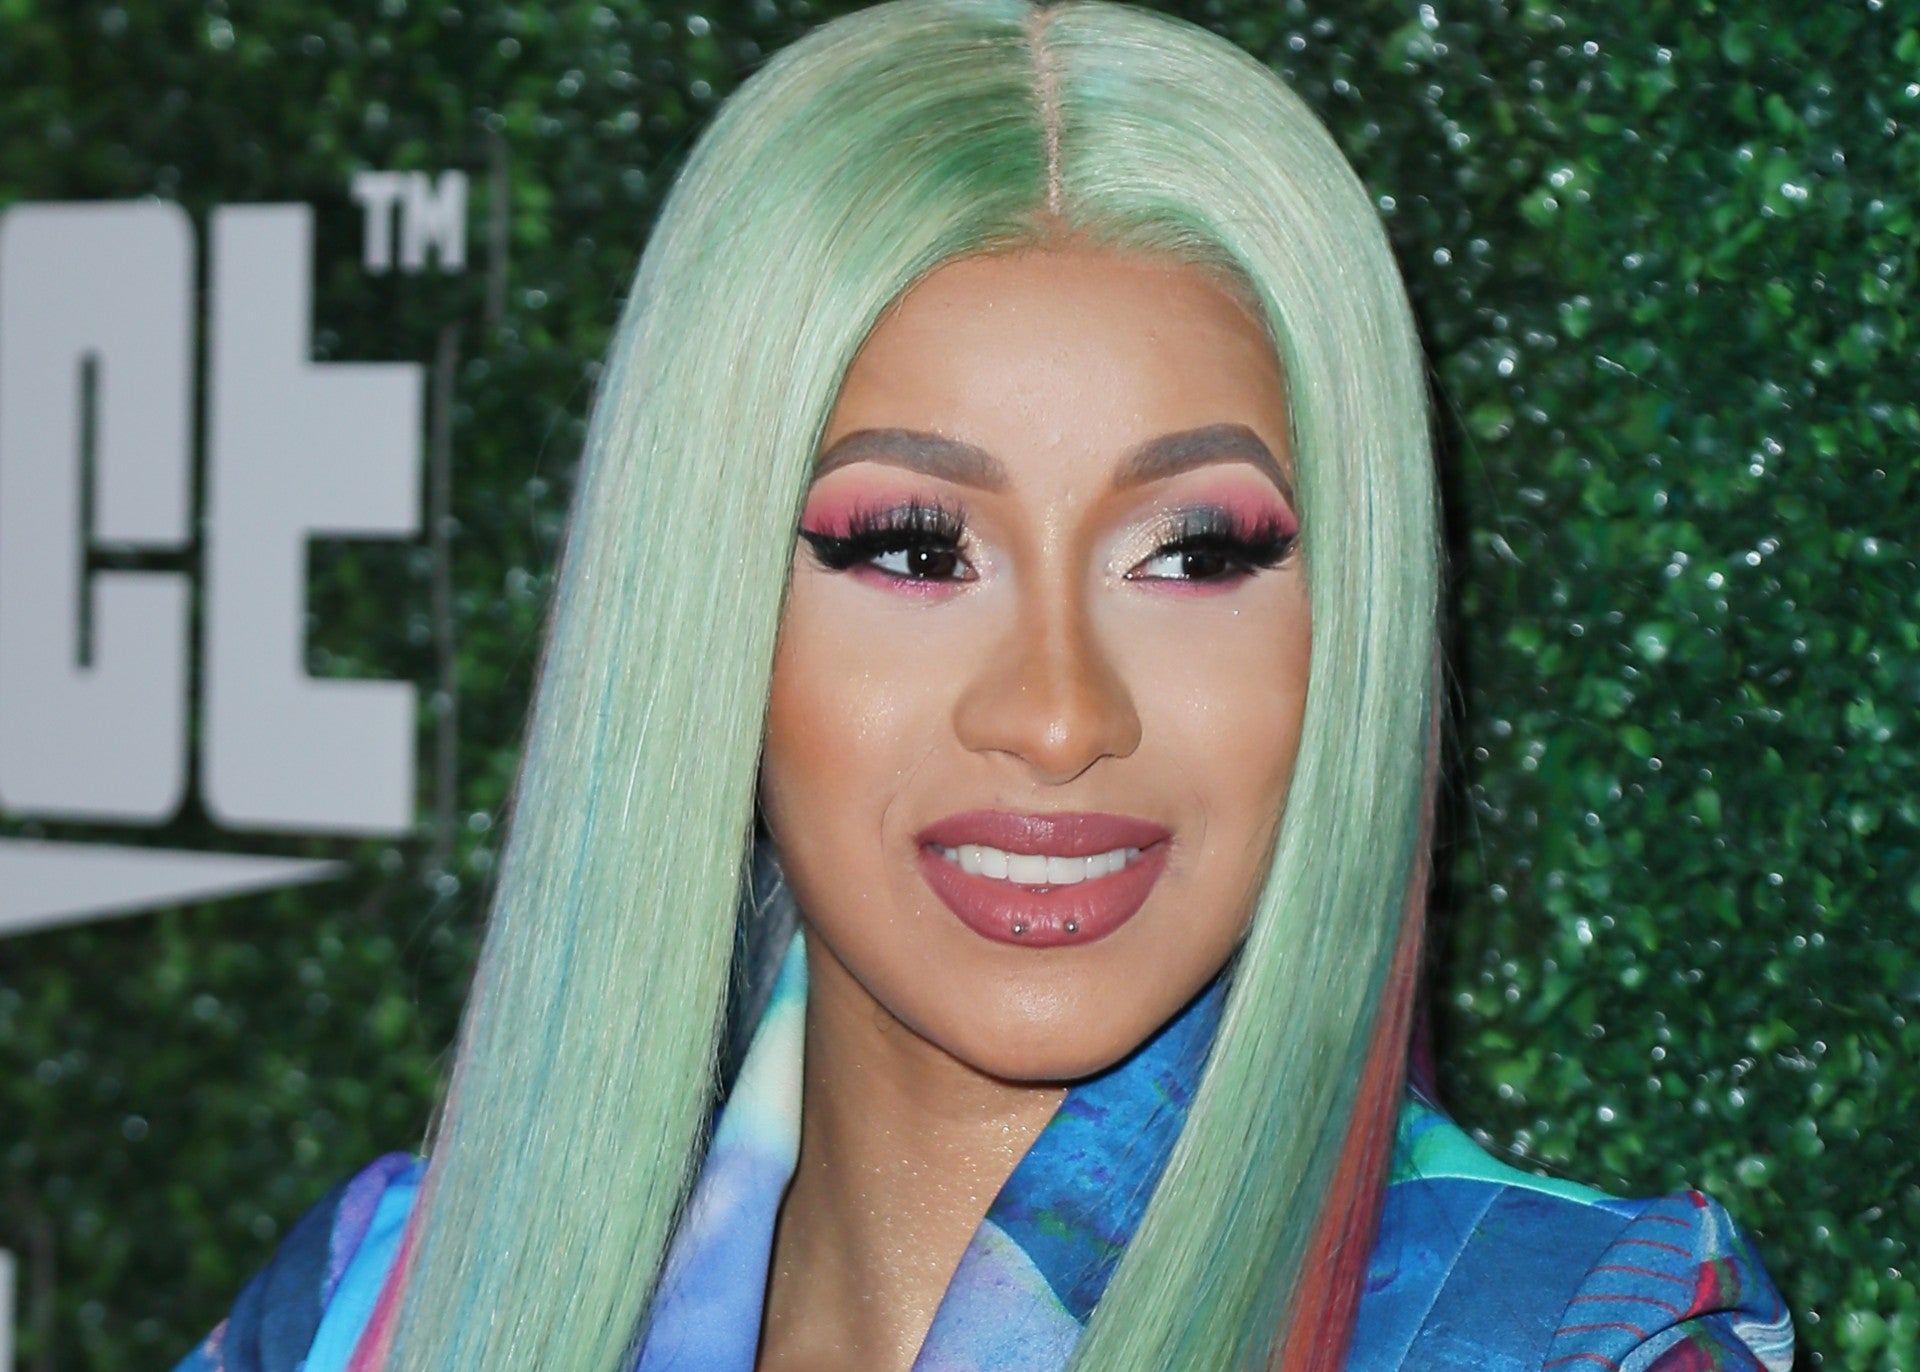 Cardi B Chants 'I Ain't Going To Jail' In Response To Indictment For Strip Club Brawl